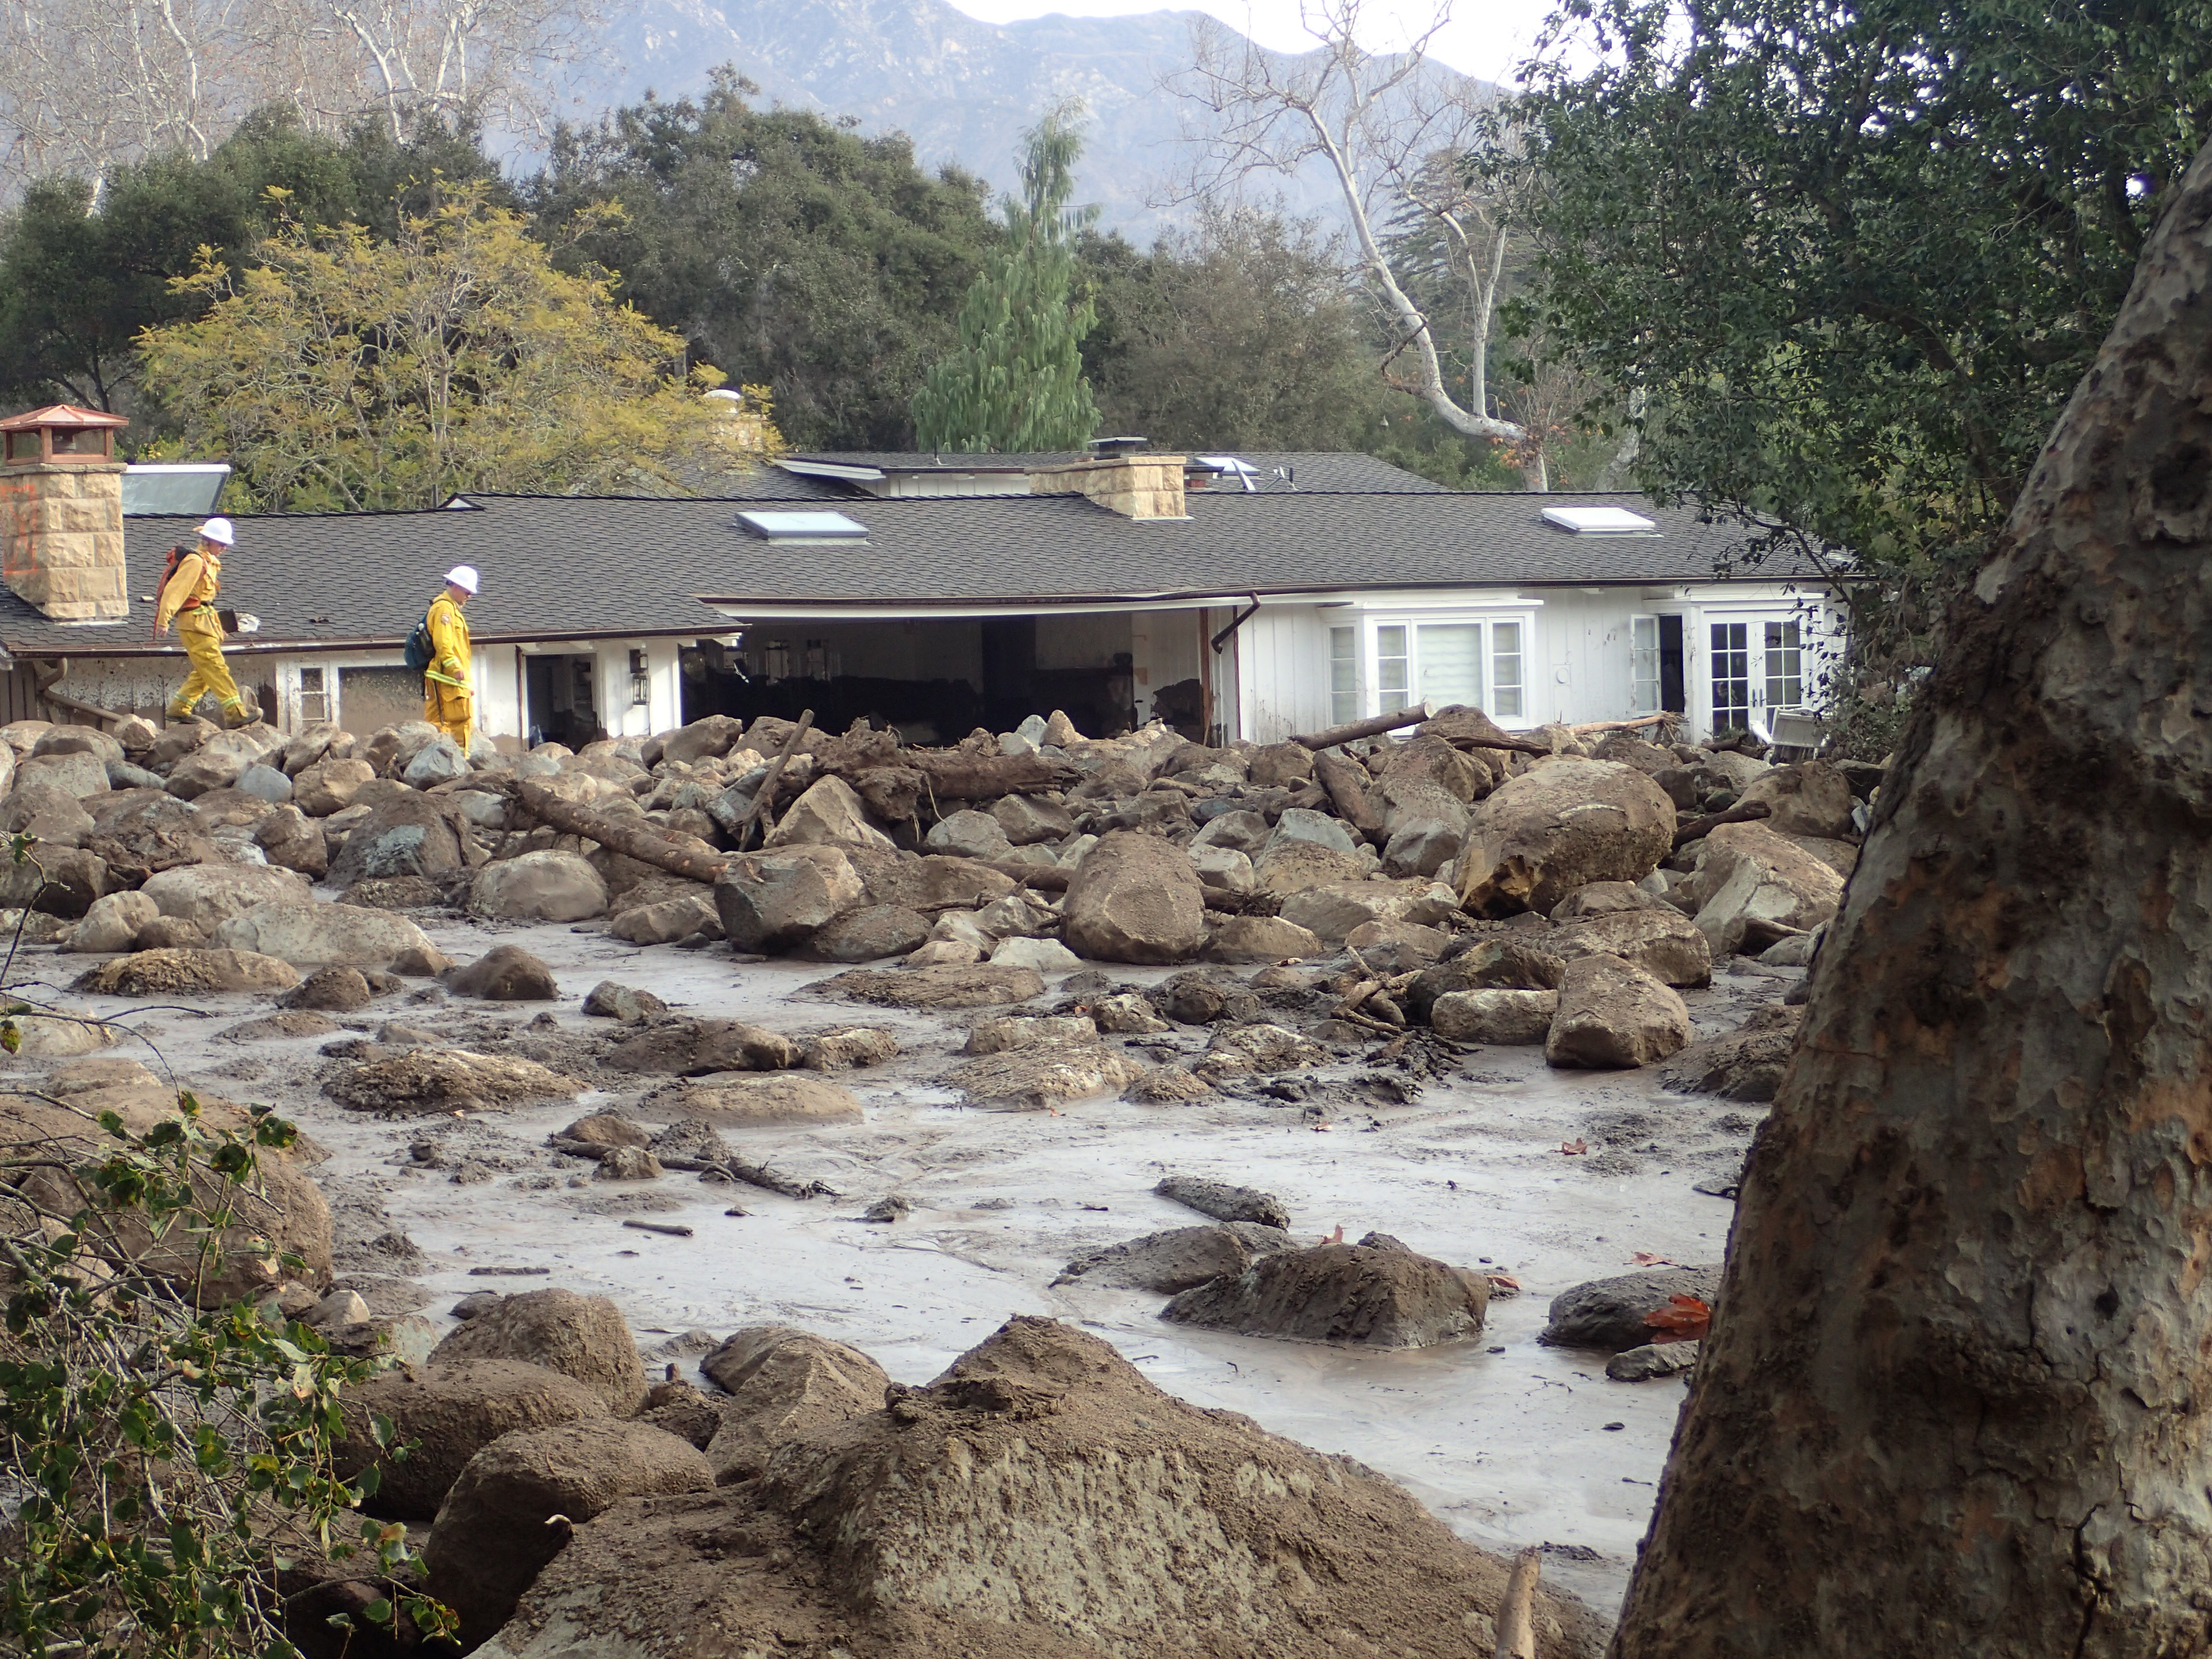 Photo of house after a mudslide happened